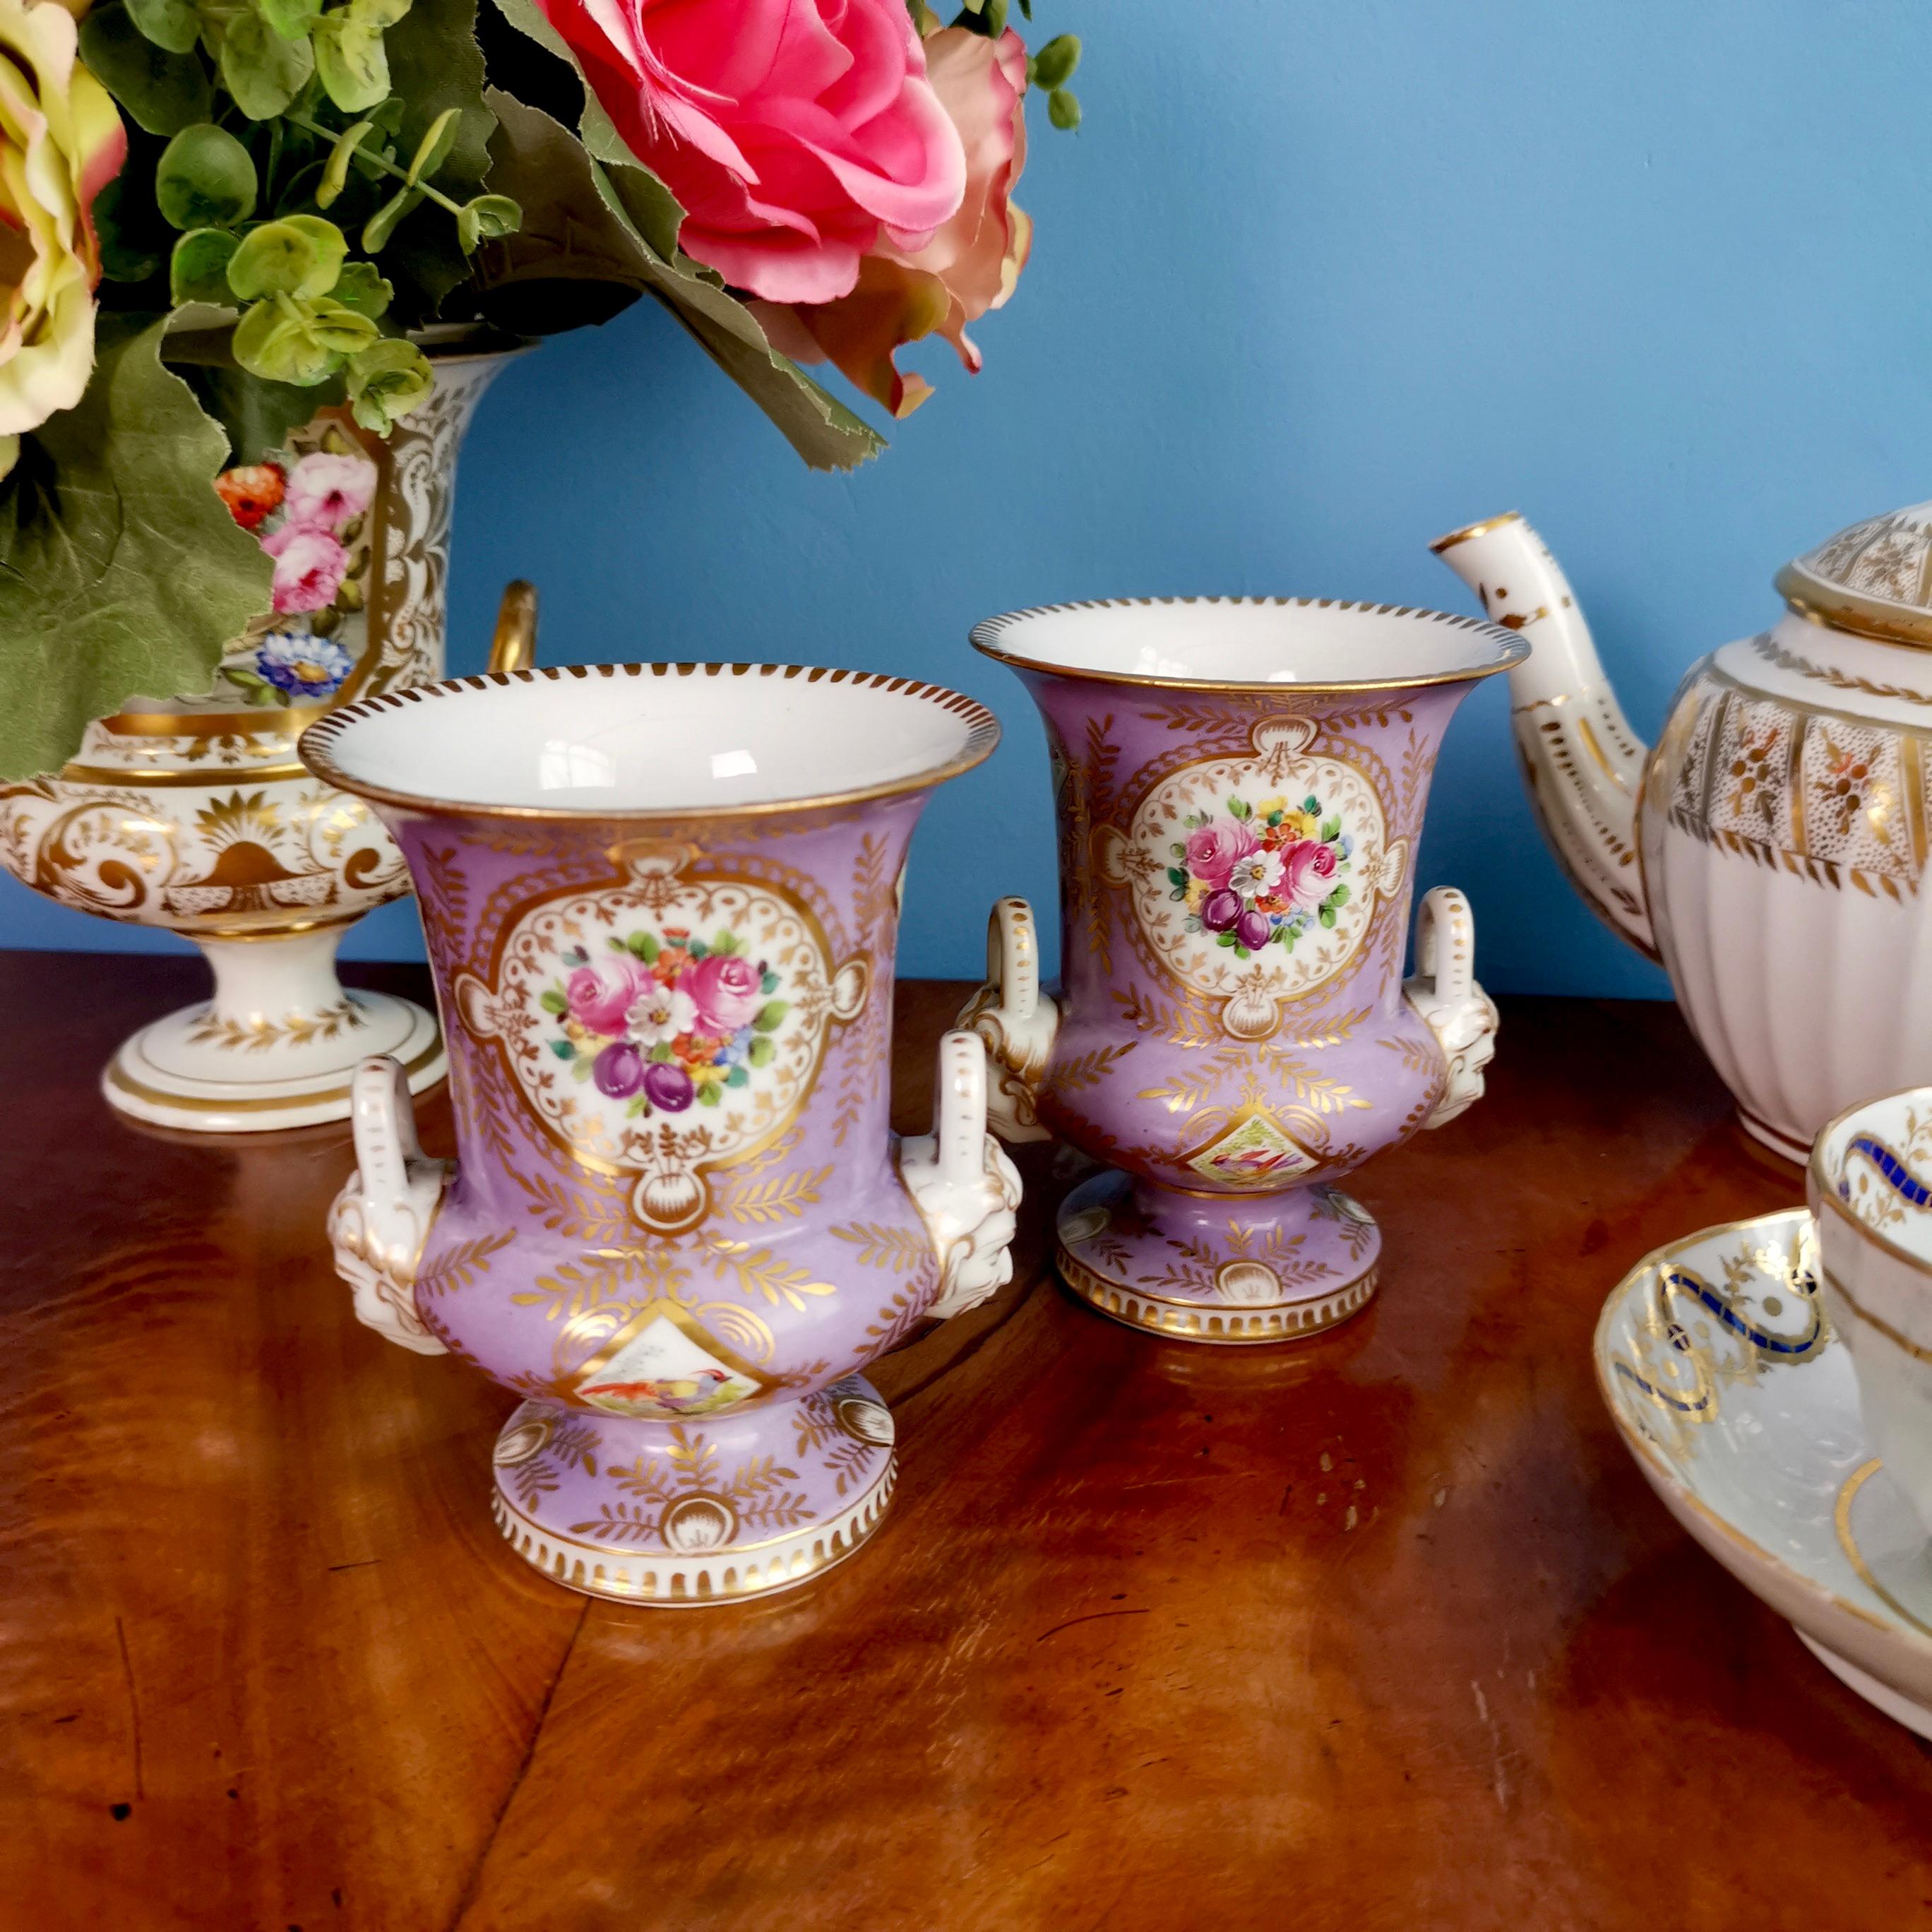 On offer is a set of two beautiful porcelain campana vases made circa 1815, attributed to Edmé Samson in Paris. The vases have a beautiful lilac ground, beautiful gilding and hand painted flower reserves.

Edmé Samson was founded in Paris in 1845